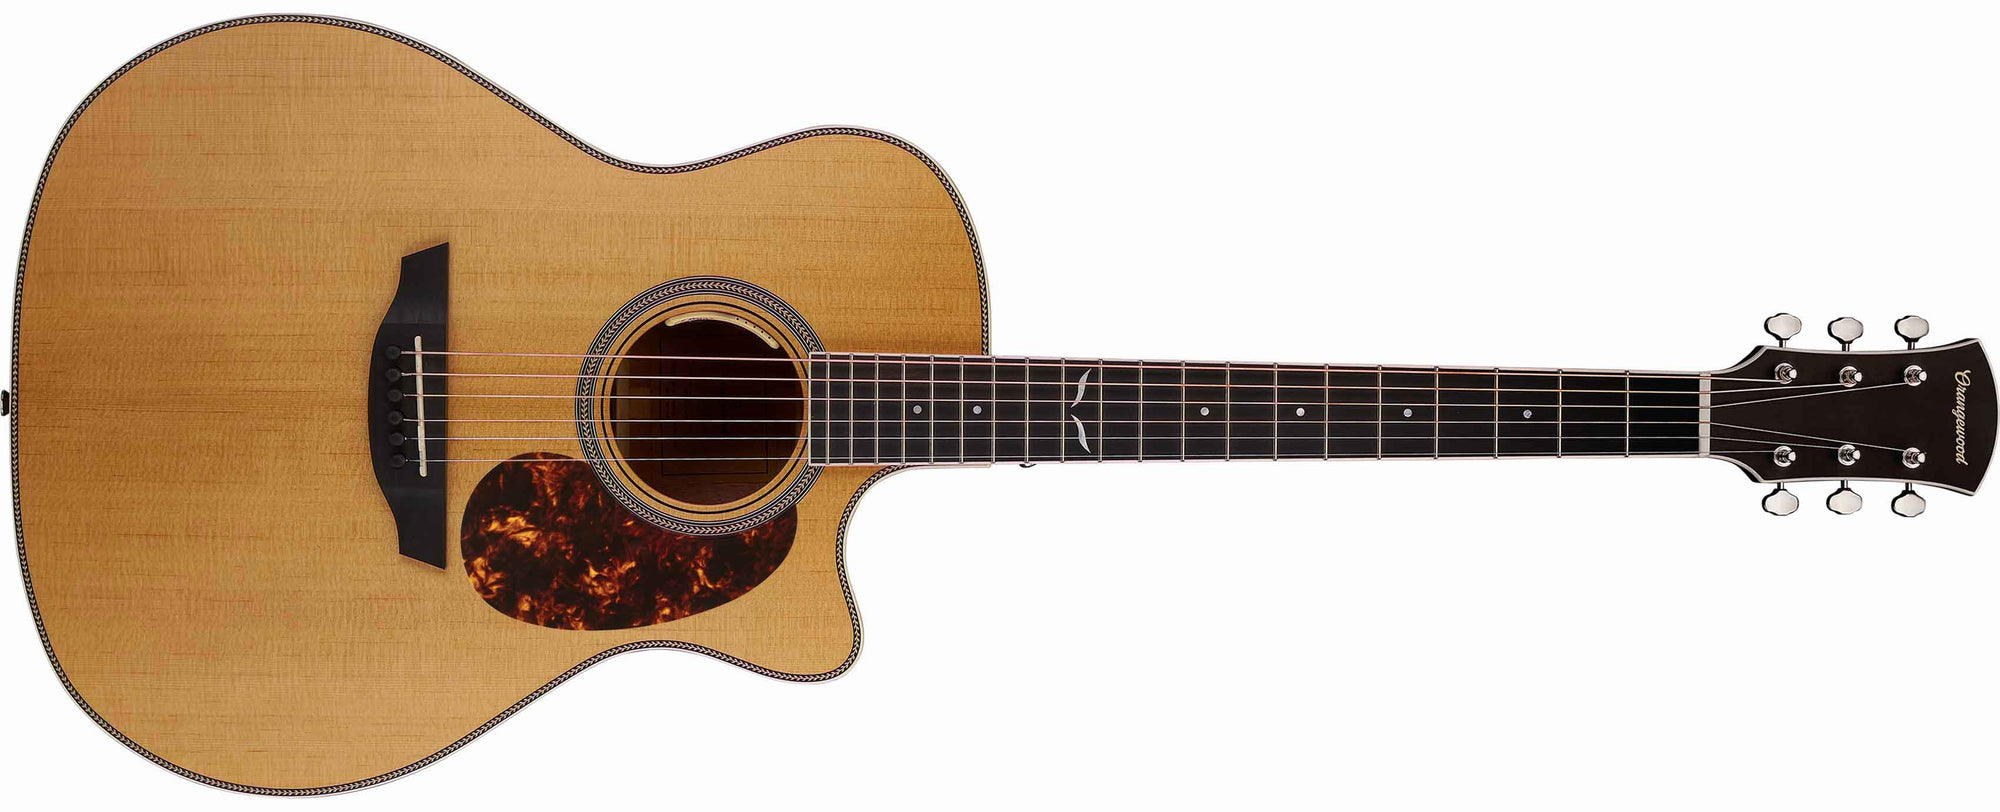 Torrefied spruce auditorium cutaway acoustic guitar with ebony fretboard, mother of pearl fretboard inlays, and silver hardware